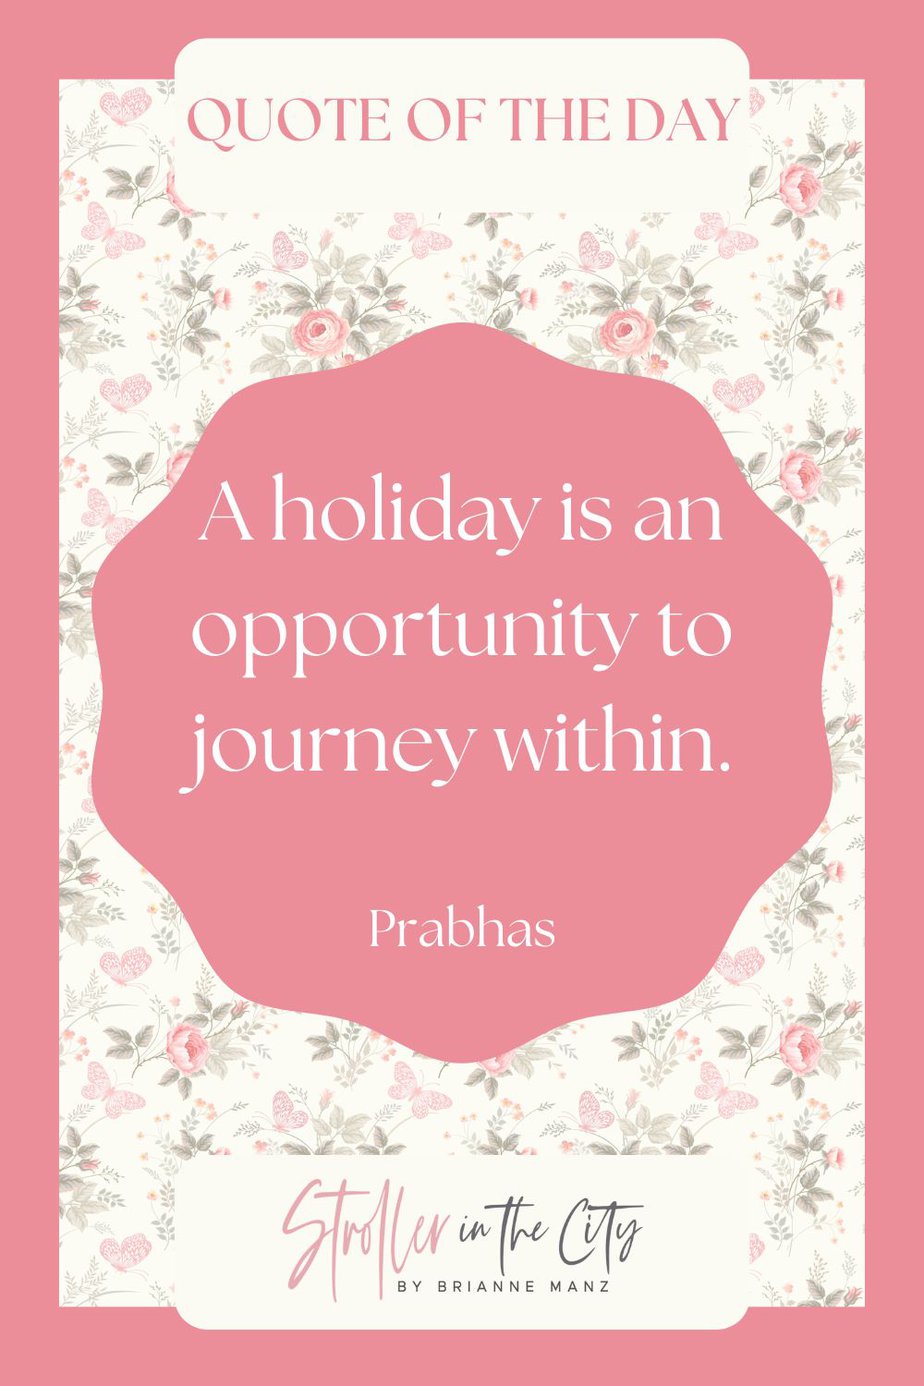 holiday quote of the day text:/ "A Holiday is an opportunity to journey within" 